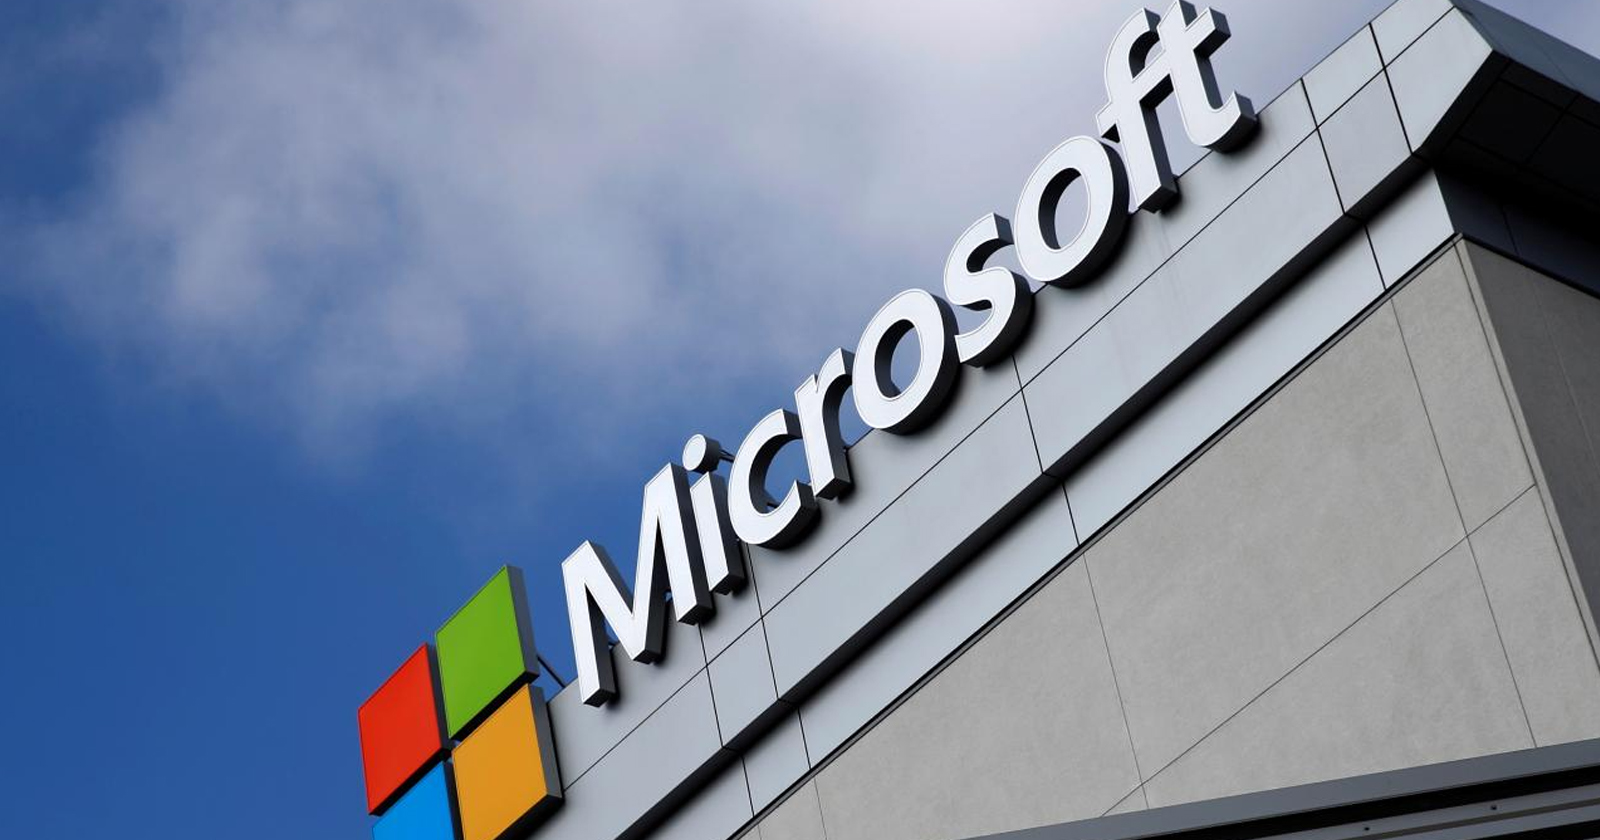 microsoft-will-pay-a-fine-of-14-million-dollars-so-why